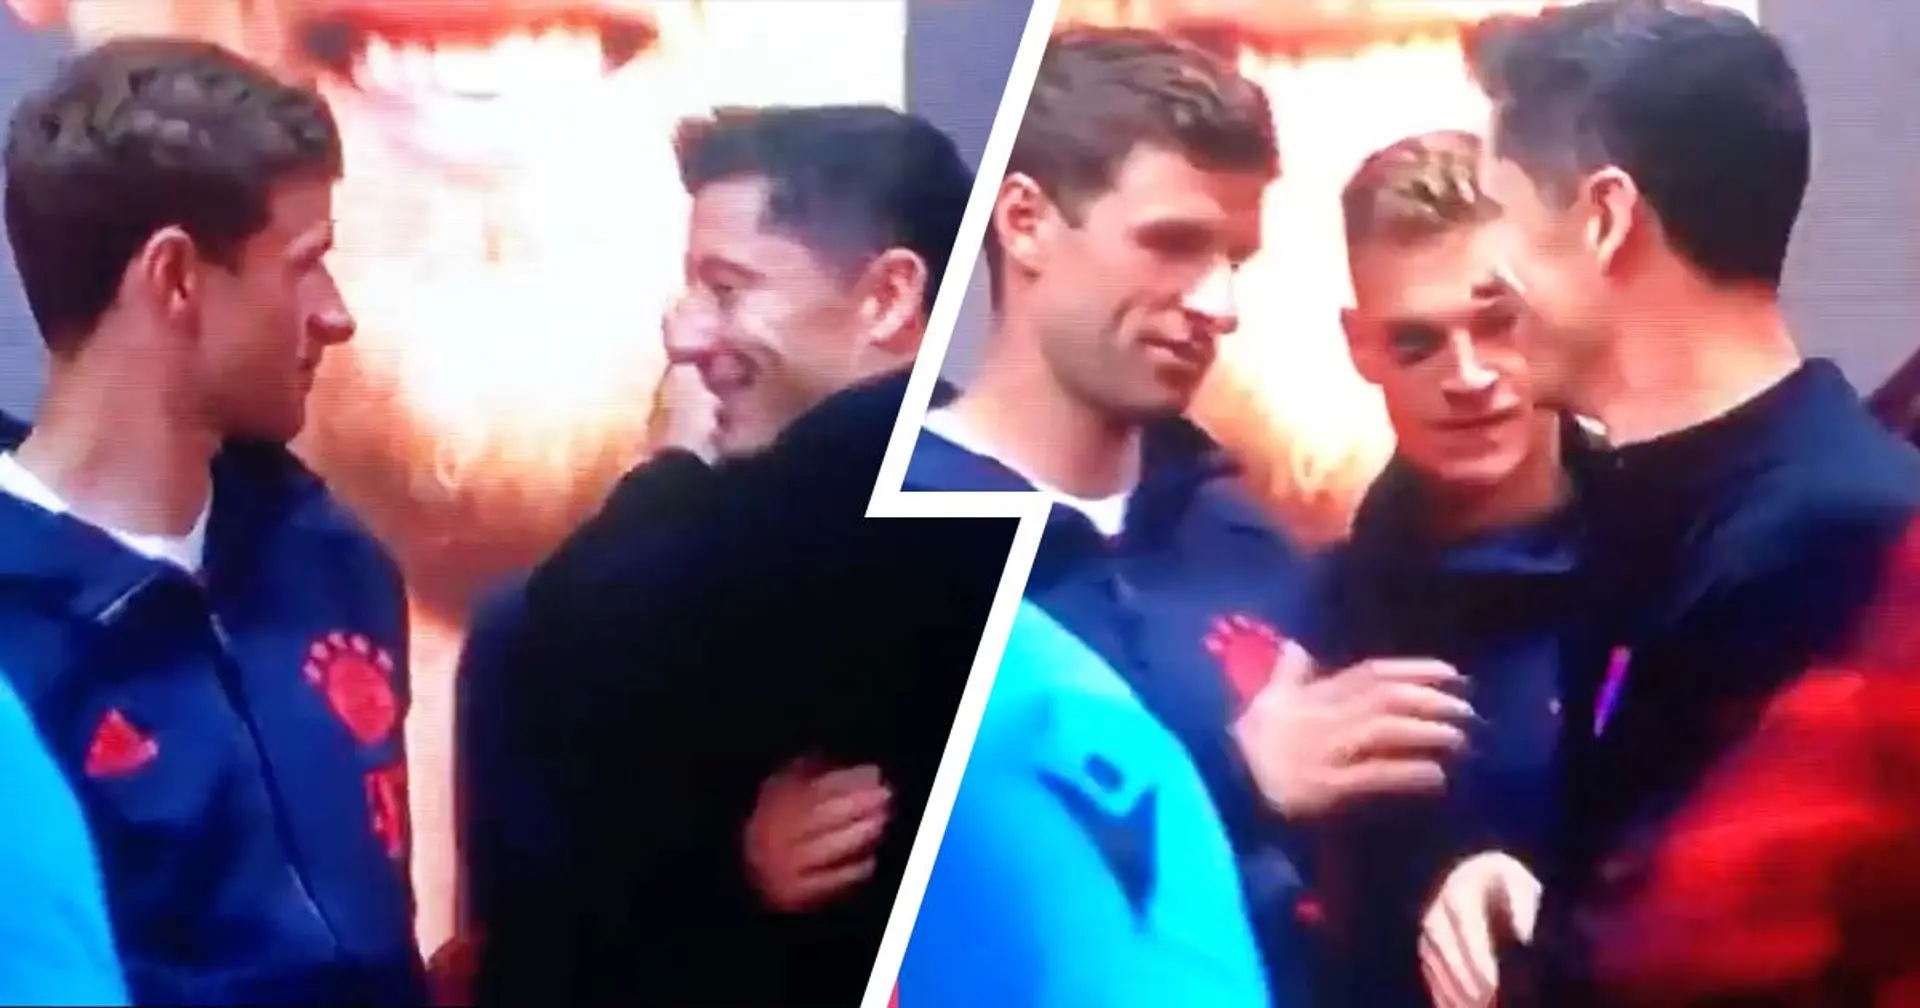 Lewandowski's awkward reaction to meeting Muller in tunnel spotted